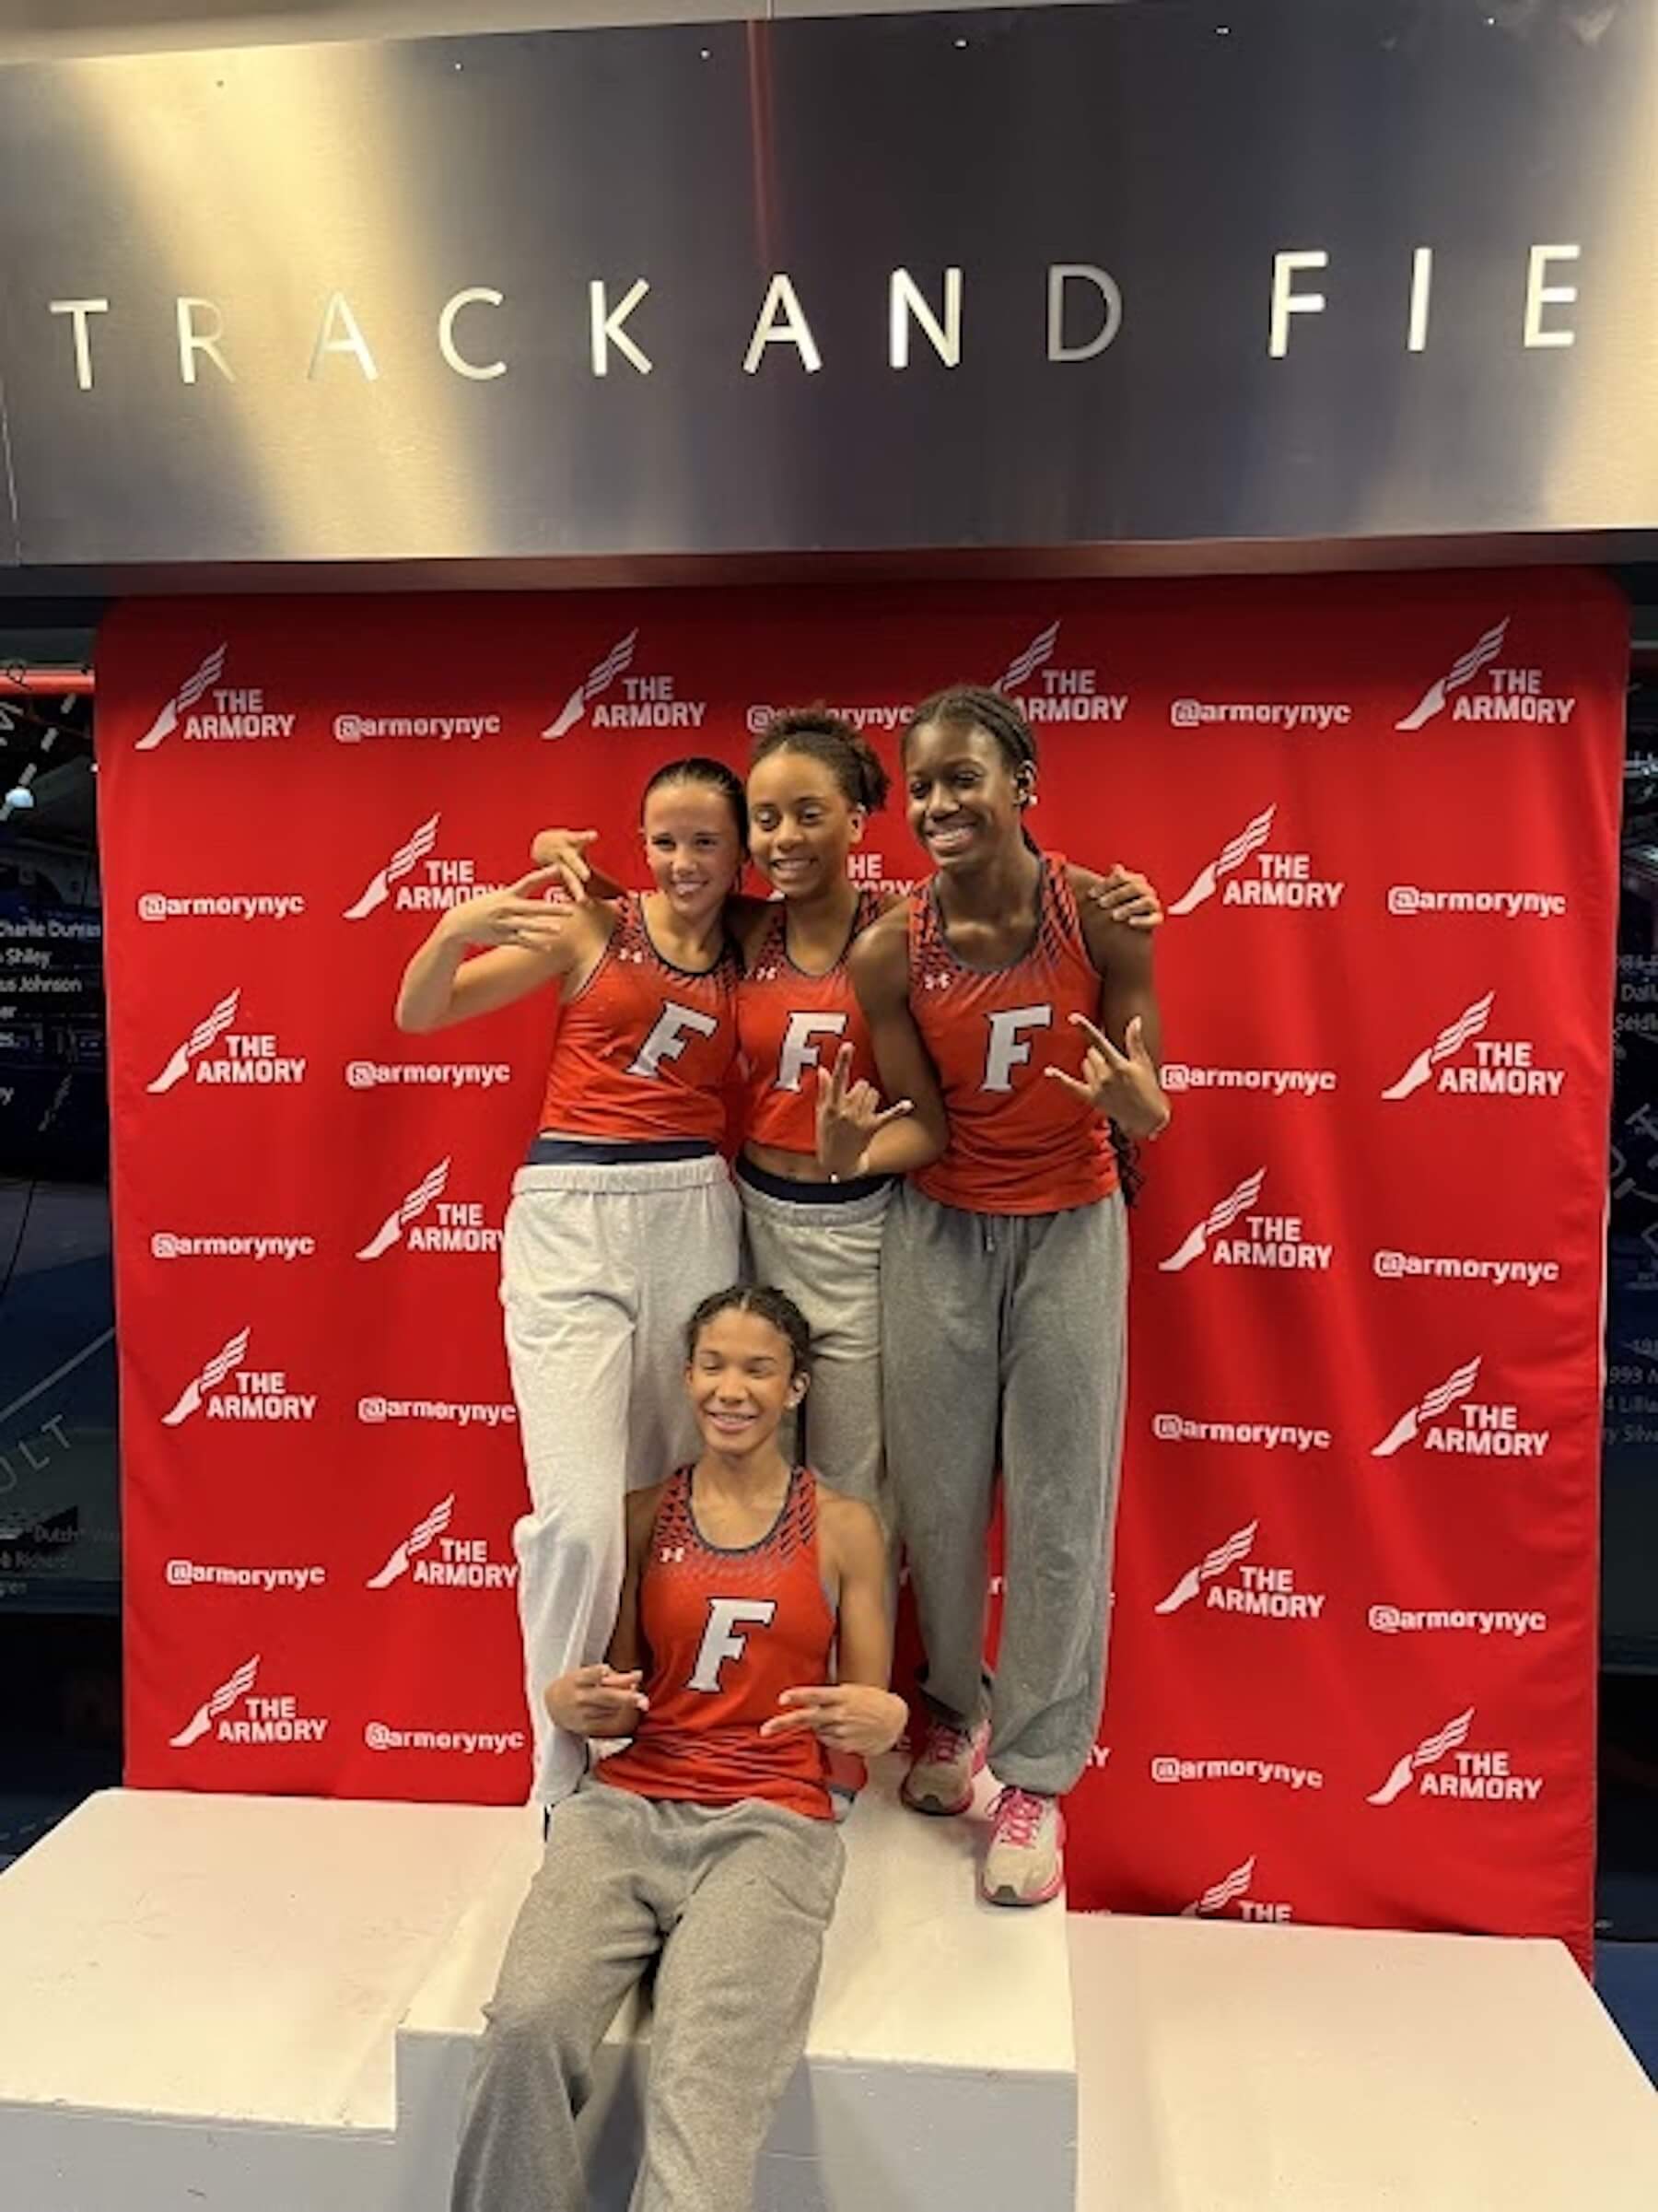 Four Ethical Culture FIeldston School Fieldston Upper Students celebrate on podium after winning at Melrose games track meet